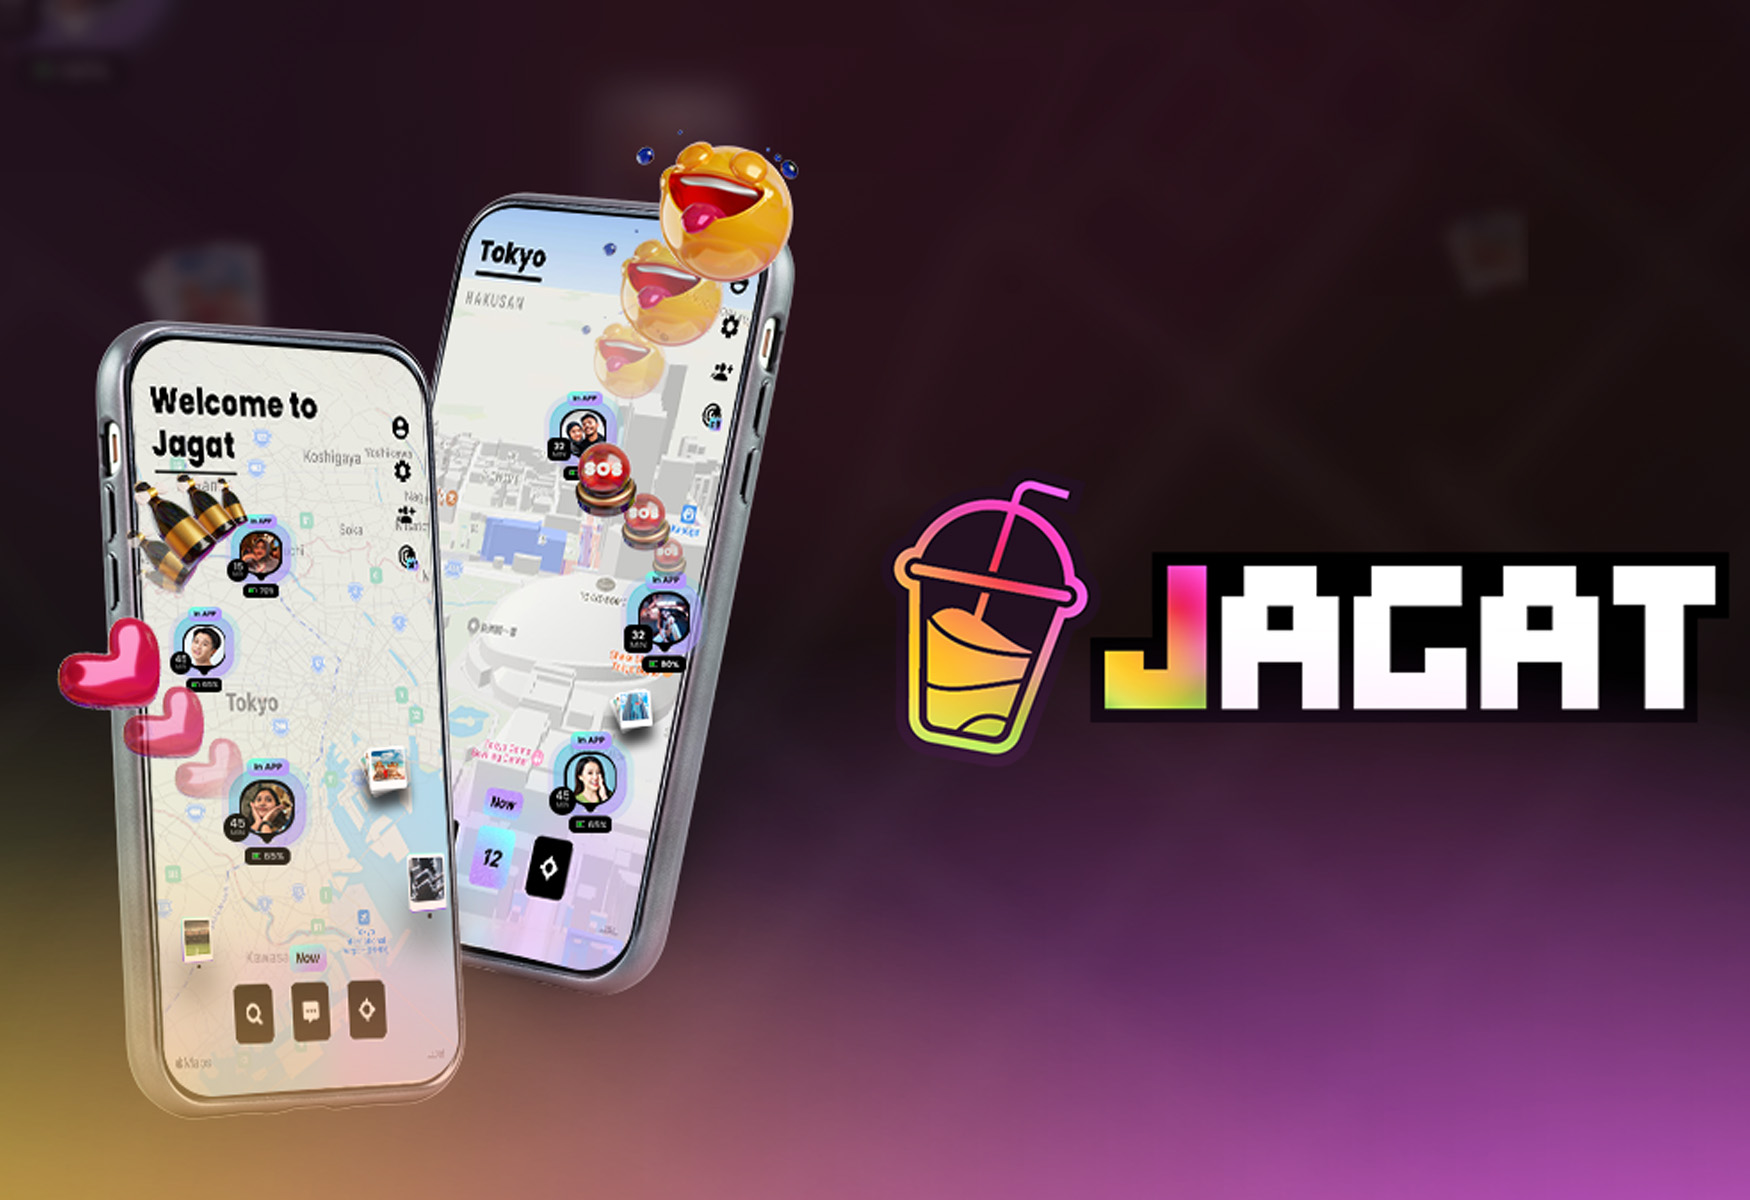 Jagat Social Network Surpasses 10 Million Users, Focusing On Real-Life Connections